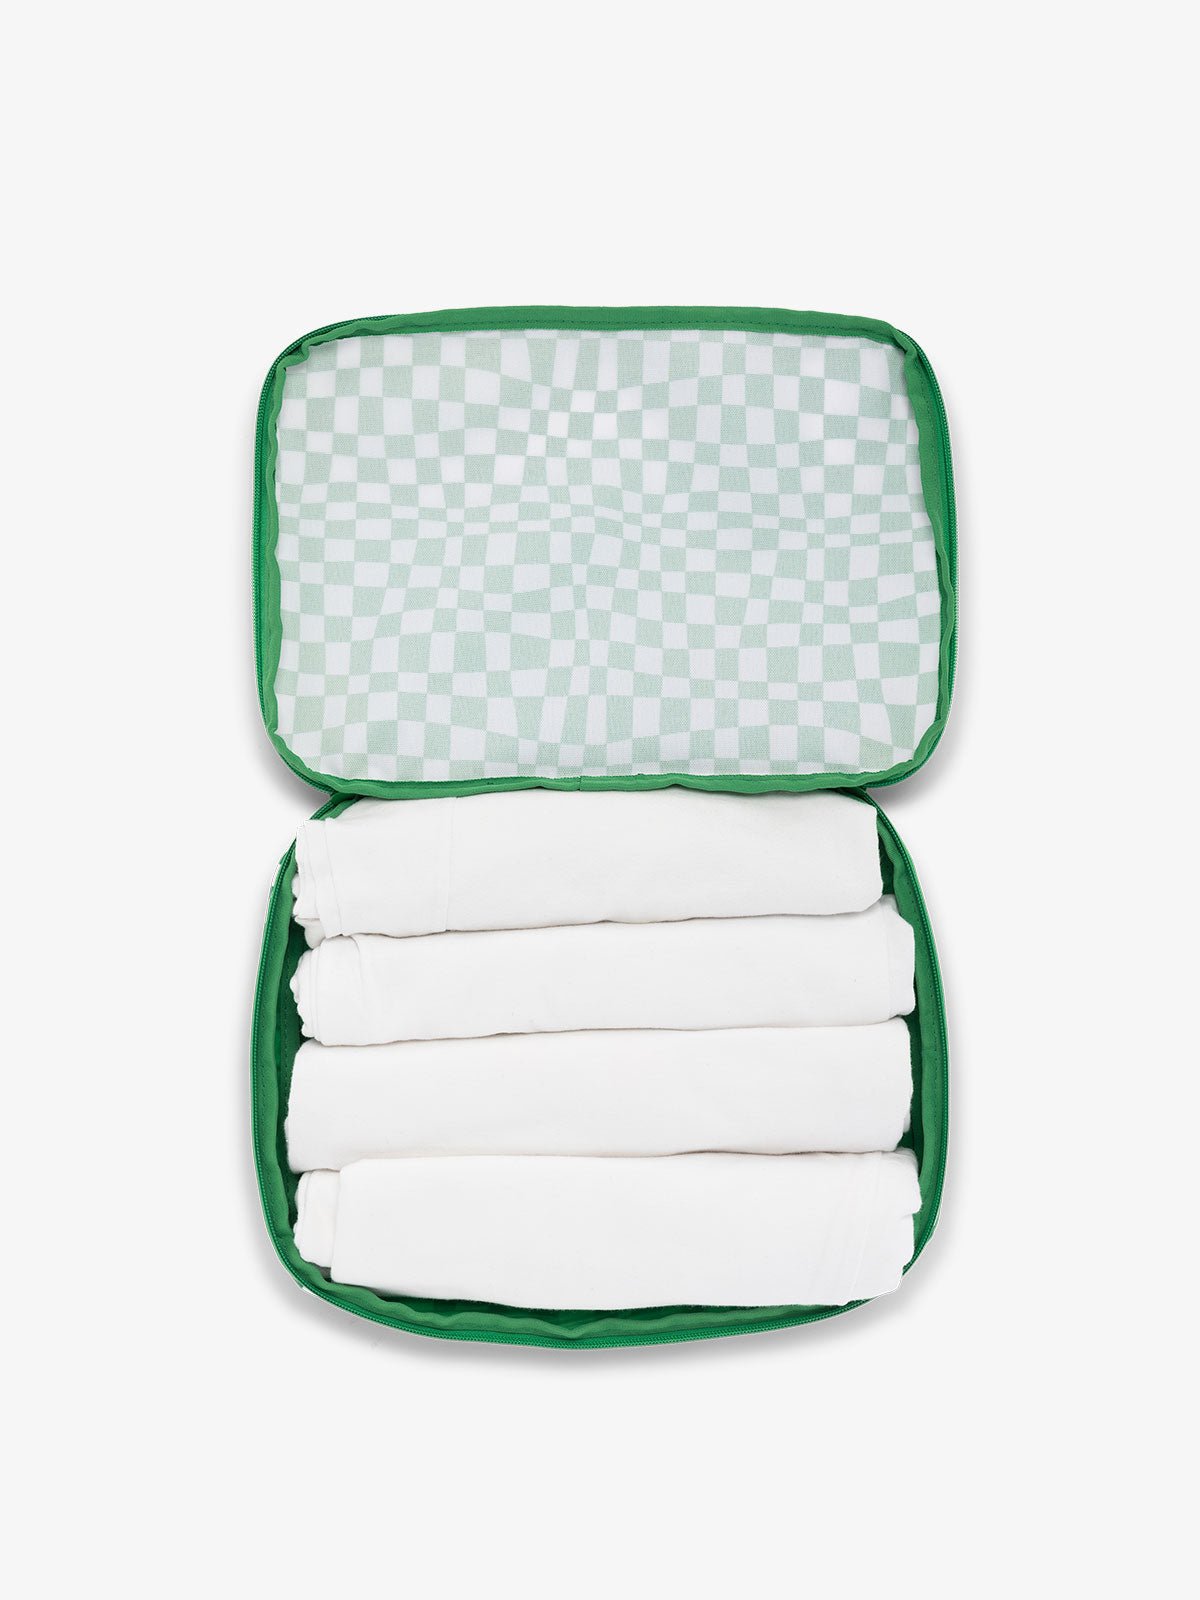 CALPAK packing cubes for travel in green checkerboard